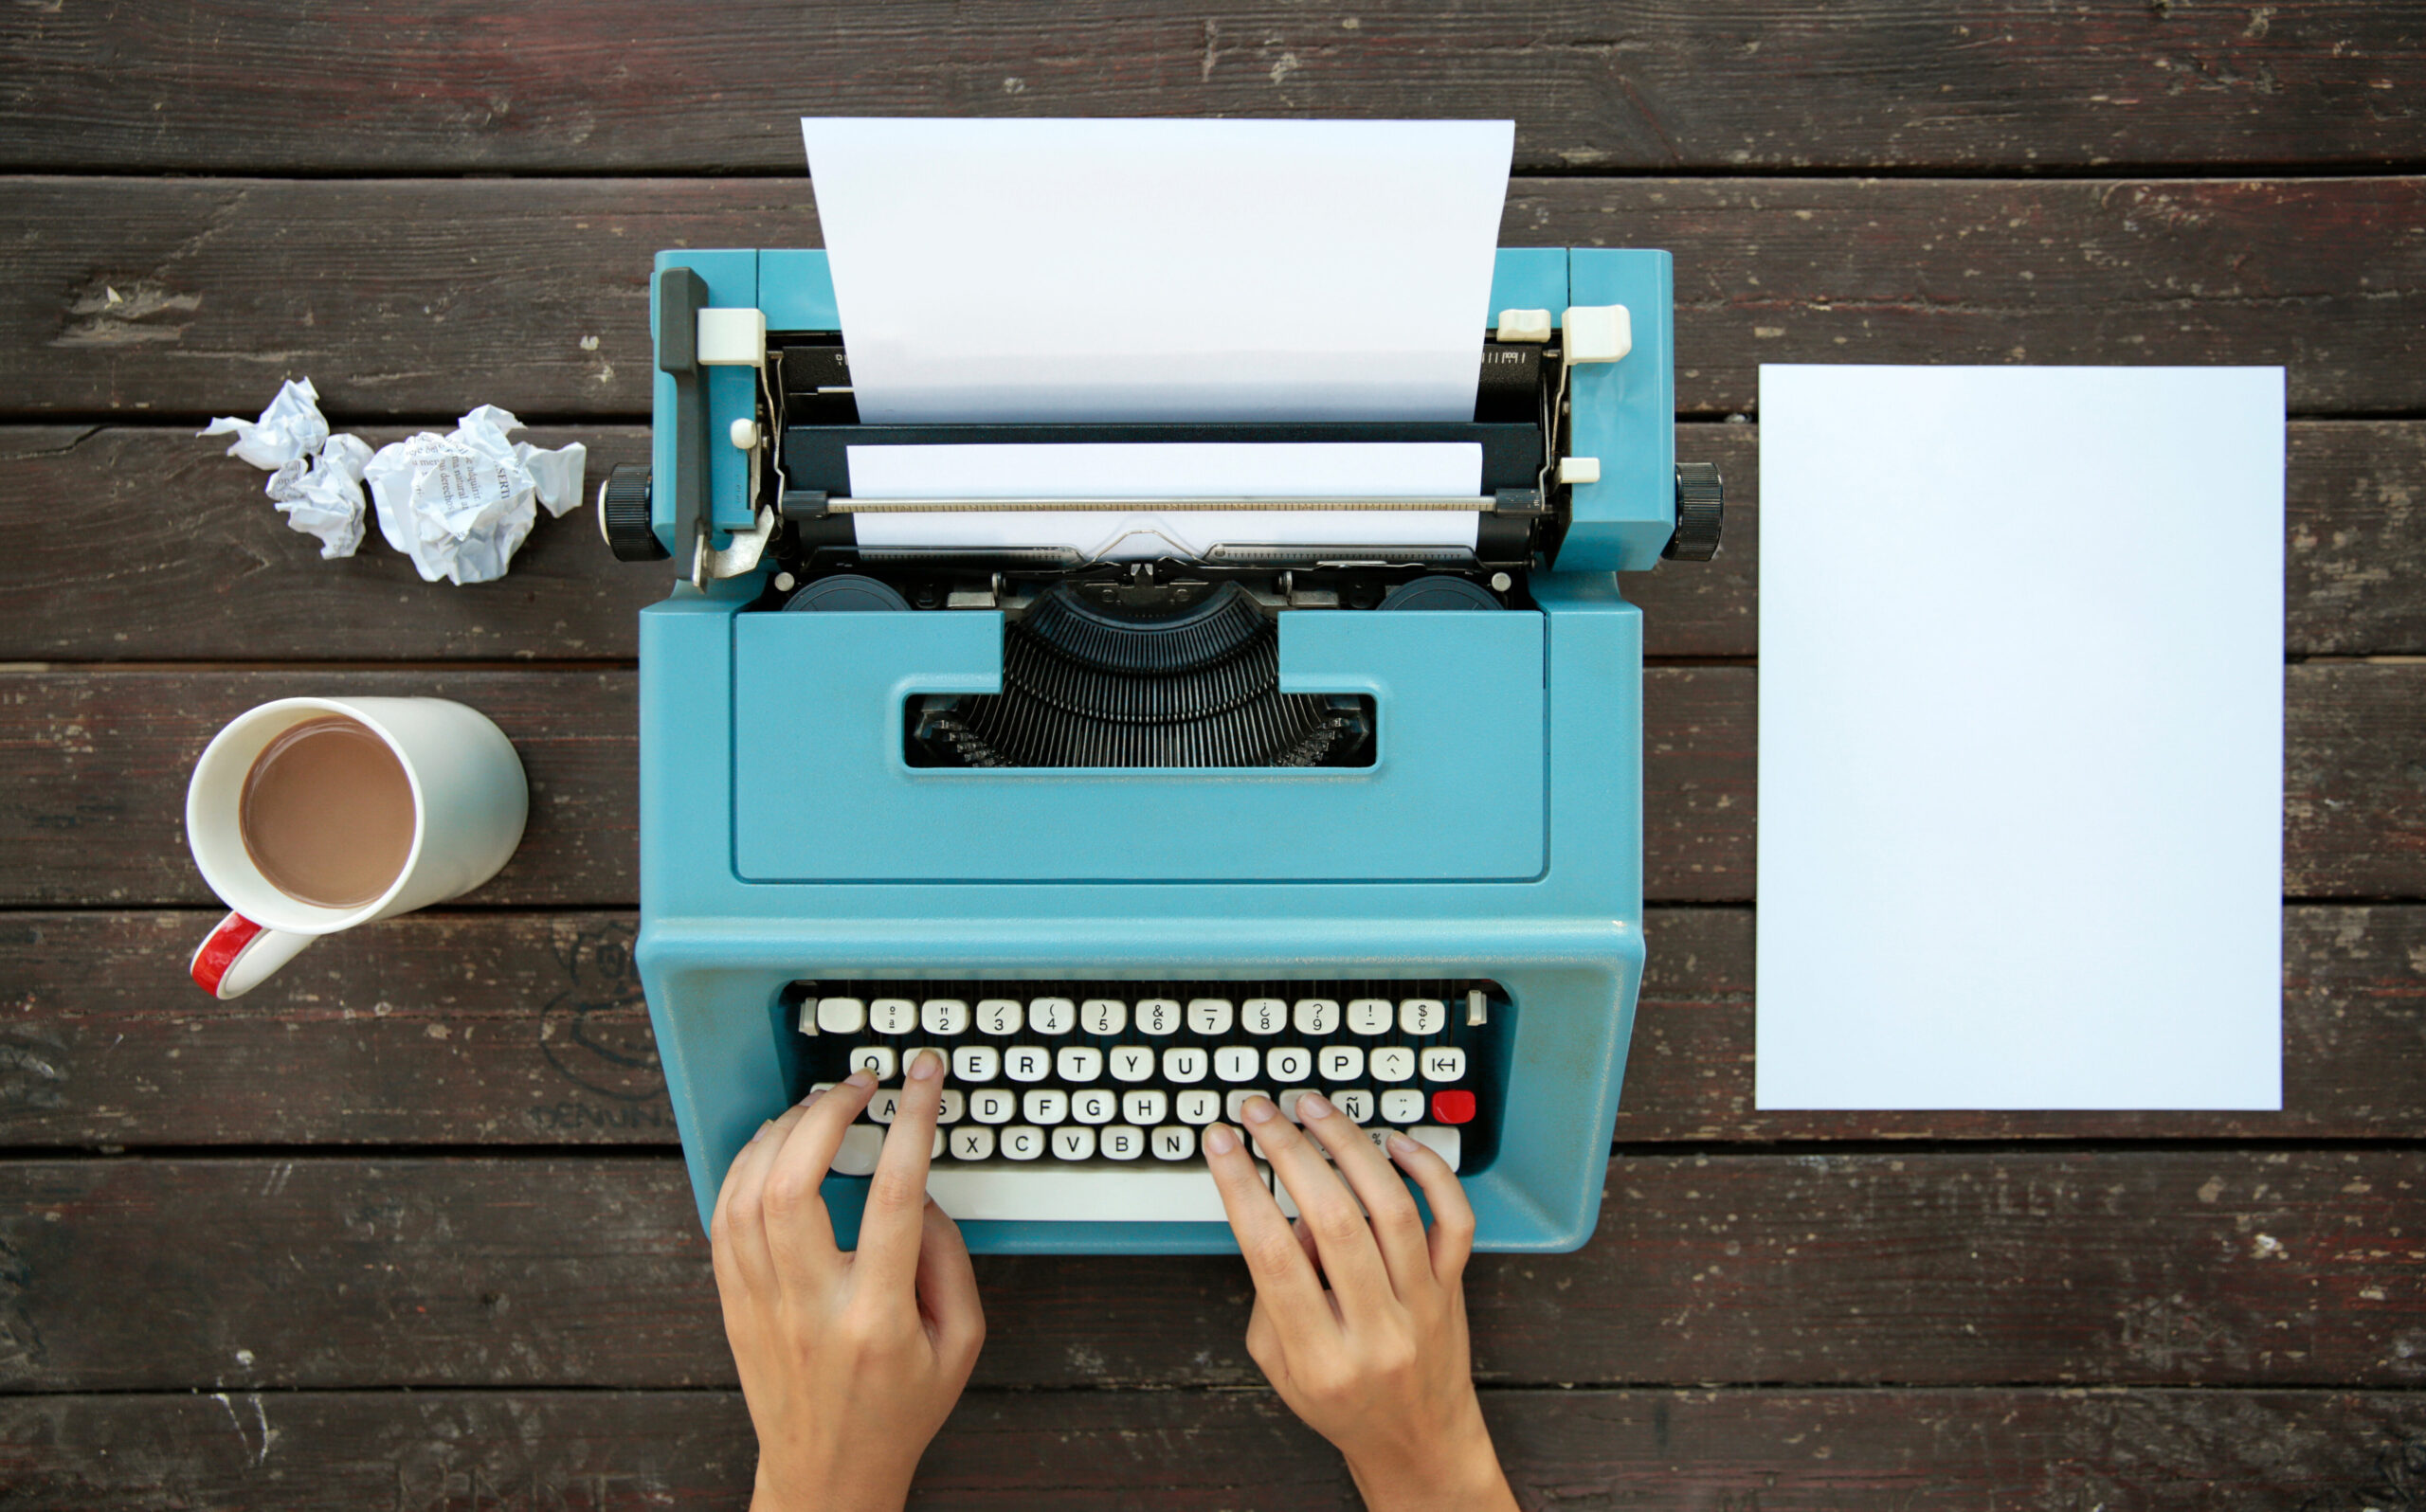 Hands are typing on a turquoise colored type-writer that is sitting on a wooden plank table with balled up pieces of papers off to the side, right behind a cup of coffee. A blank piece of paper is laying on the table to the right of the type-writer.